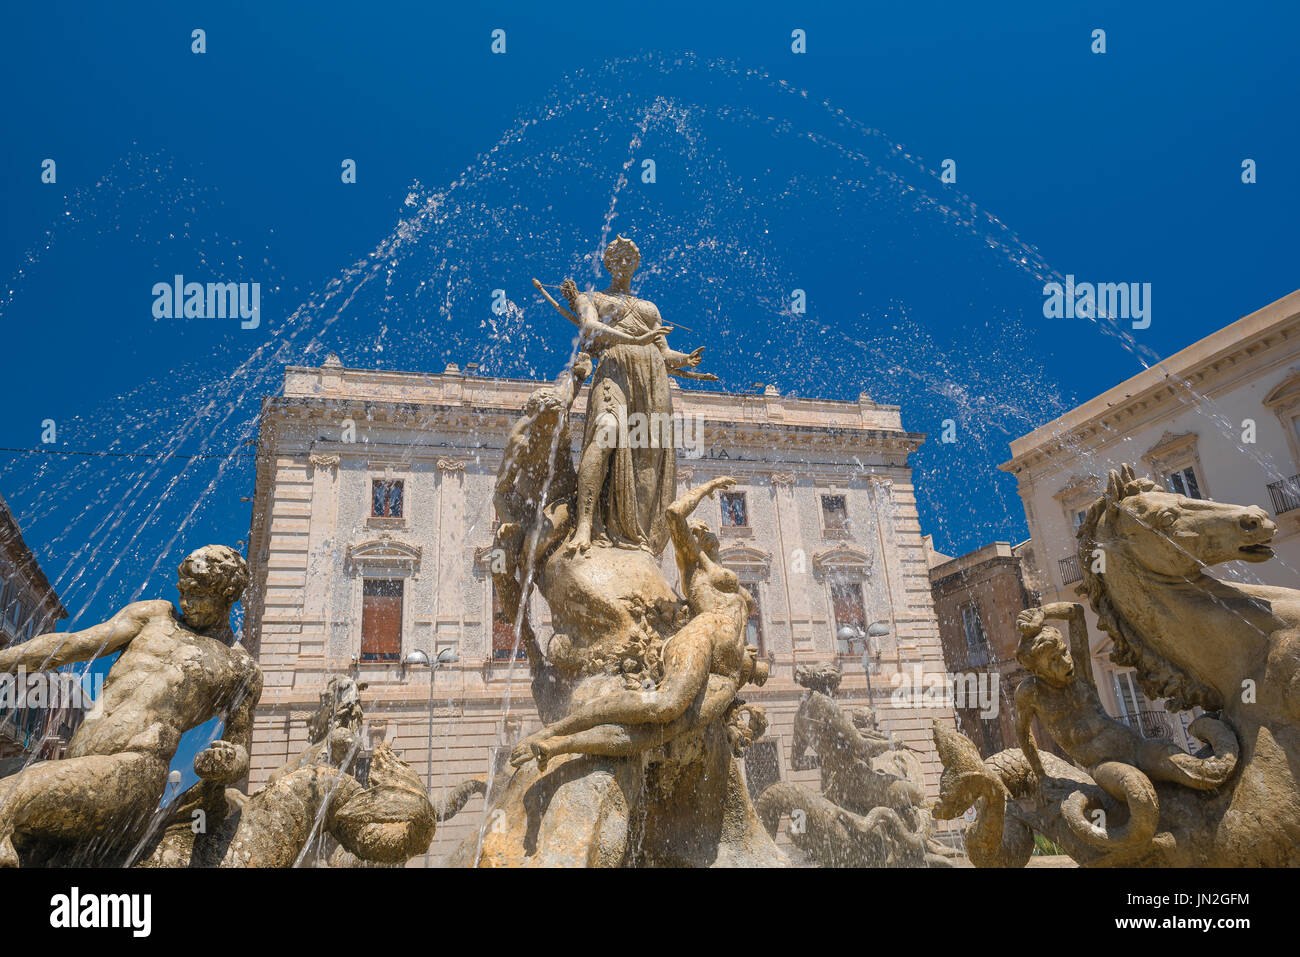 Sicily Baroque fountain, view in summer of the historic Fountain of Artemis in the Piazza Archimede in Ortigia, Syracuse,Sicily. Stock Photo